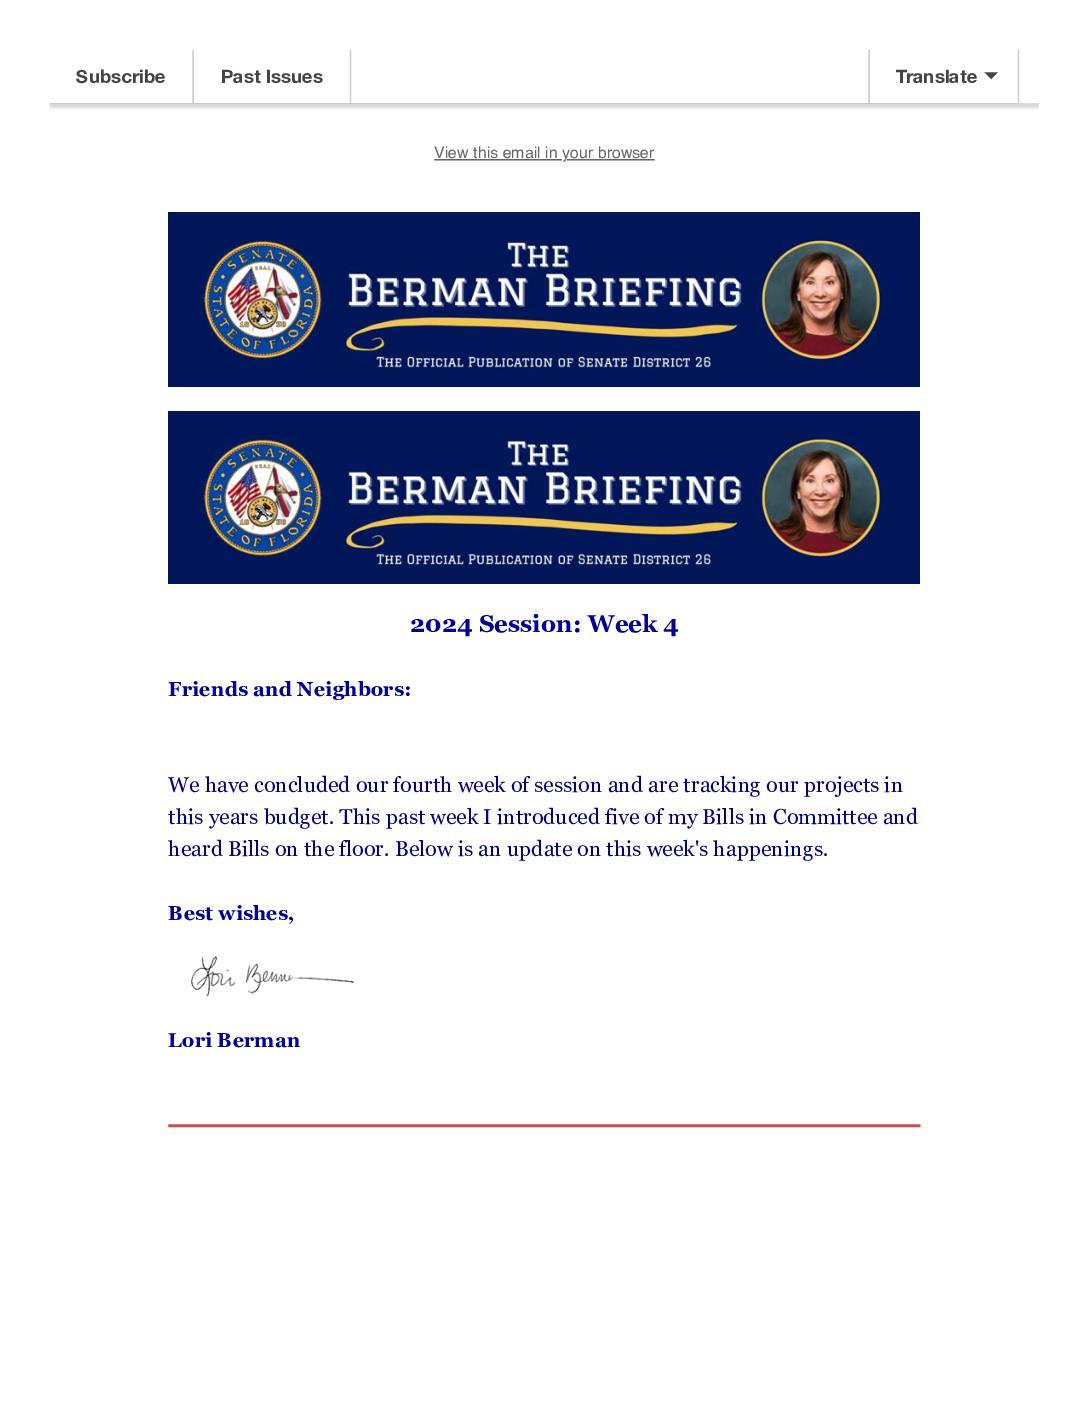 The Berman Briefing Session 2024 Week Four